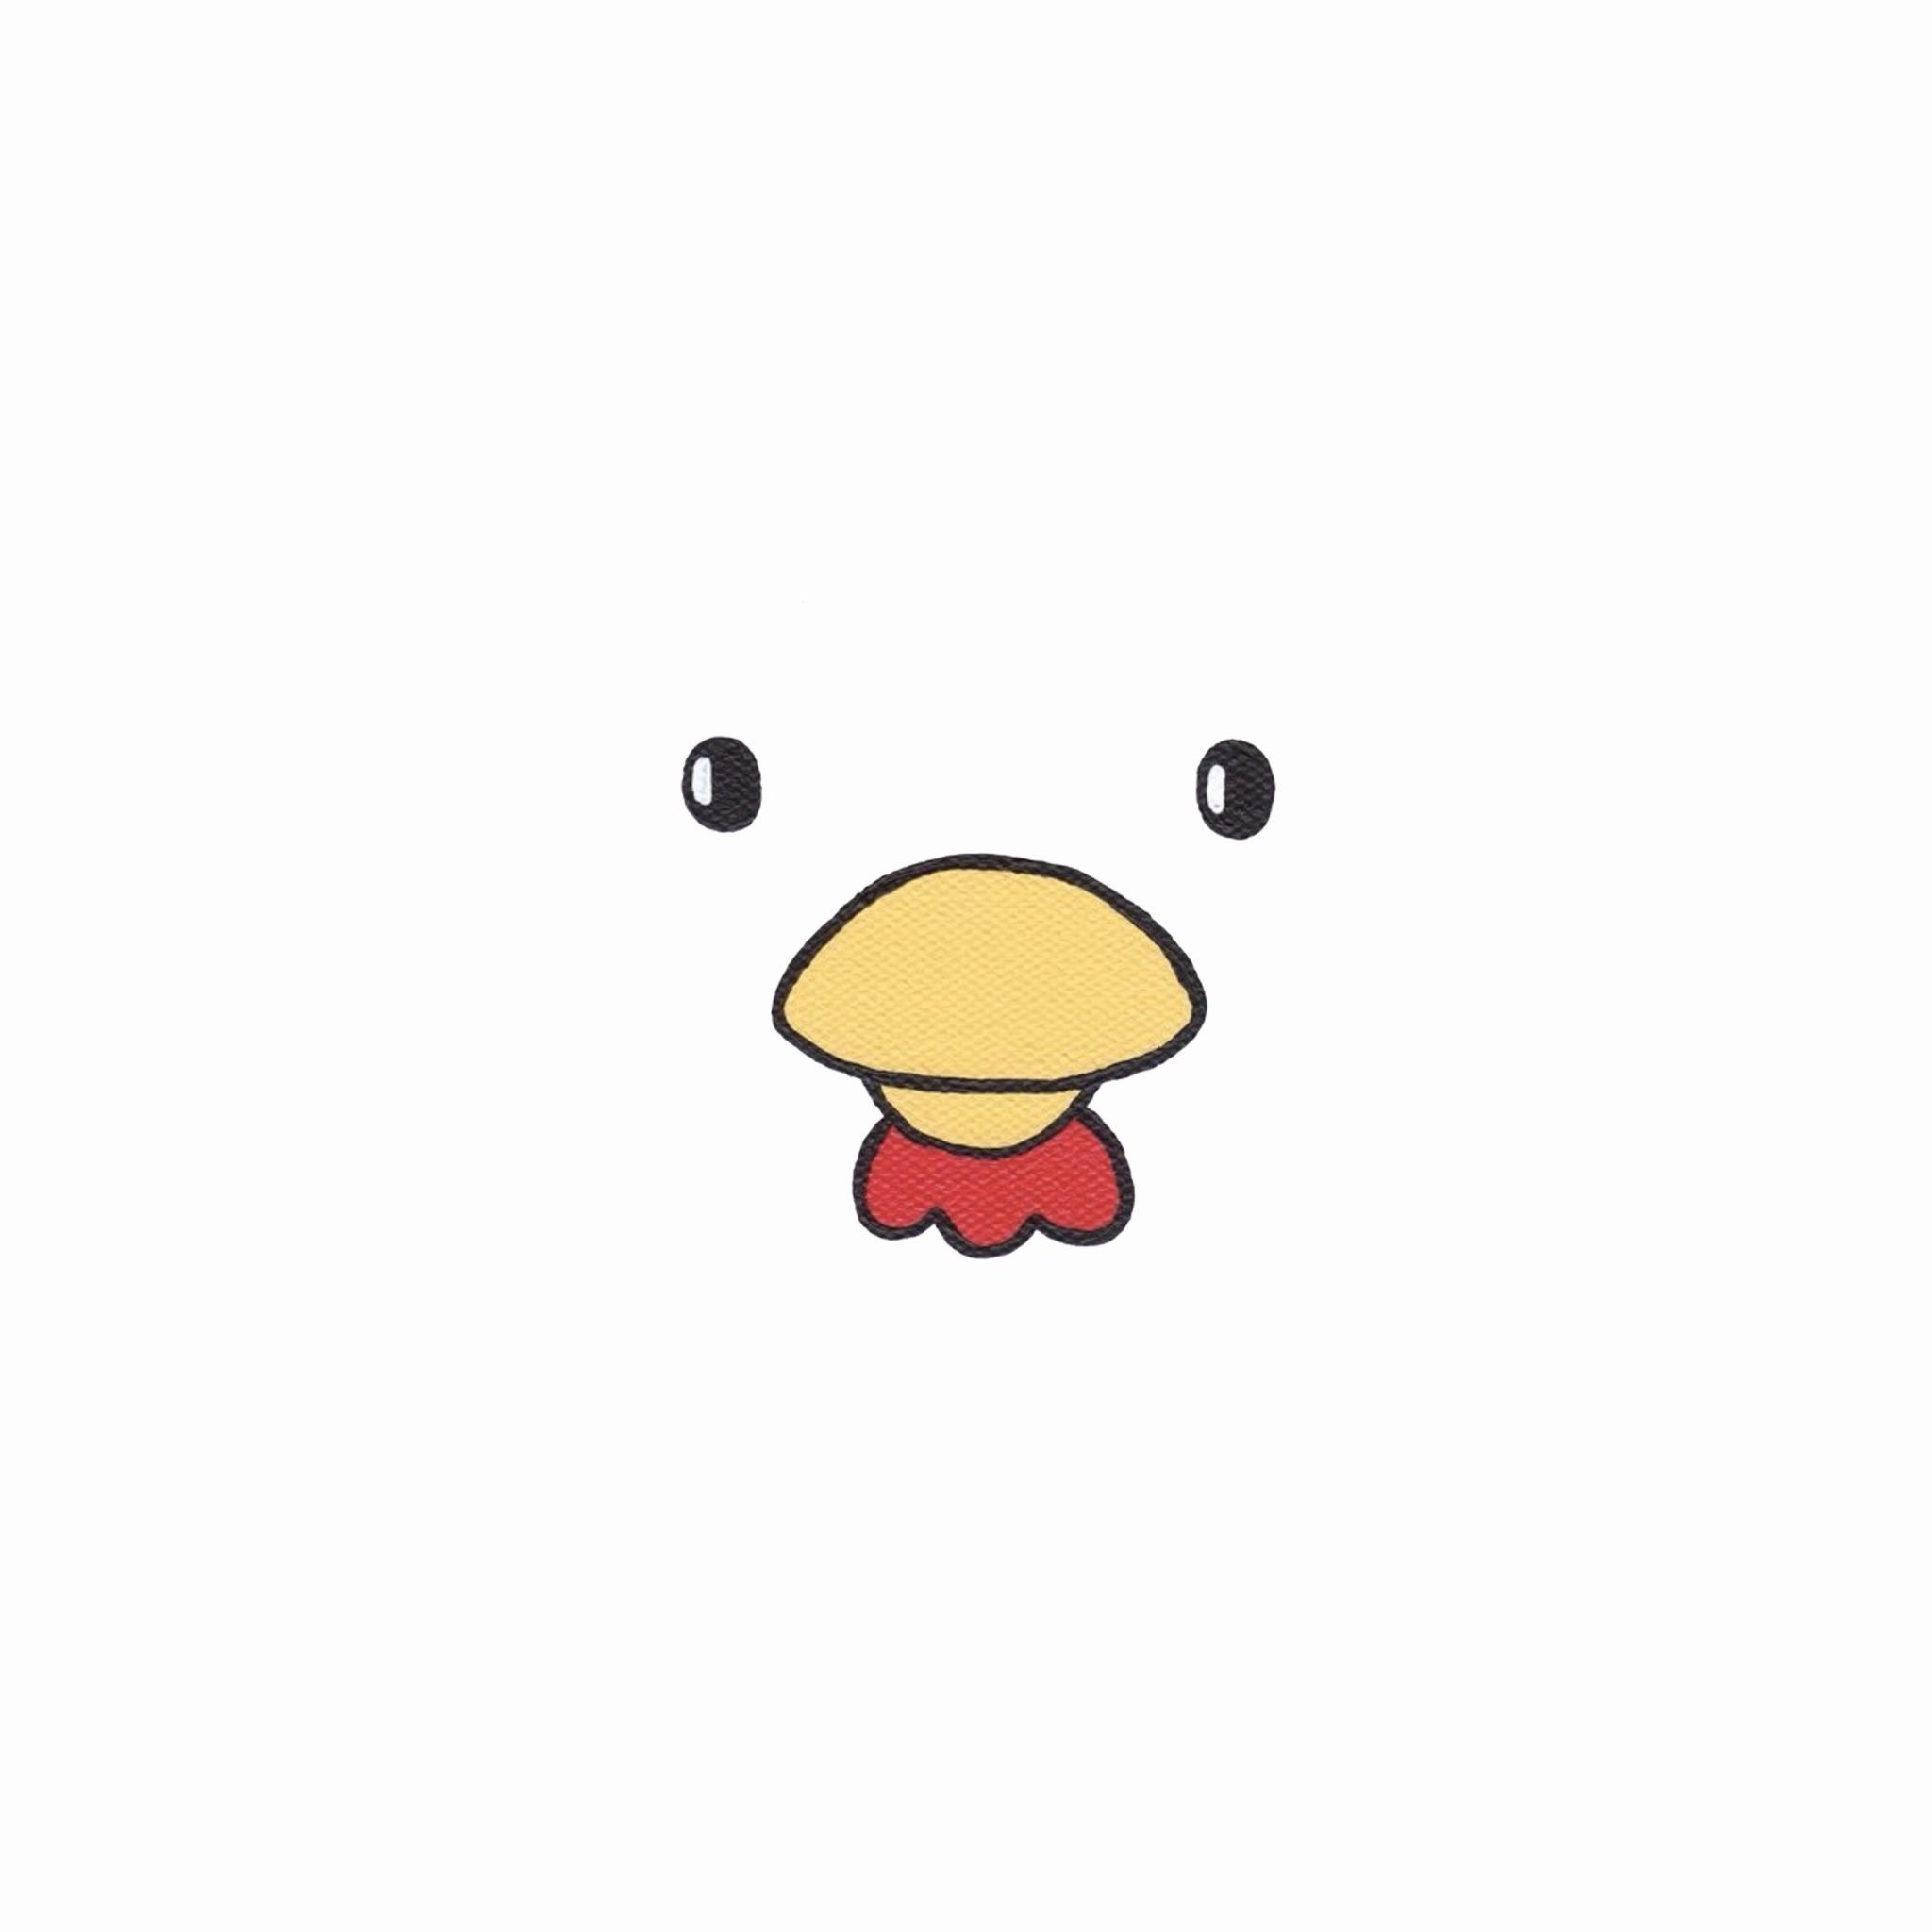 Duckling cuteness, Small and adorable, iPad mini delight, Wallpaper for chicken lovers, 2050x2050 HD Handy